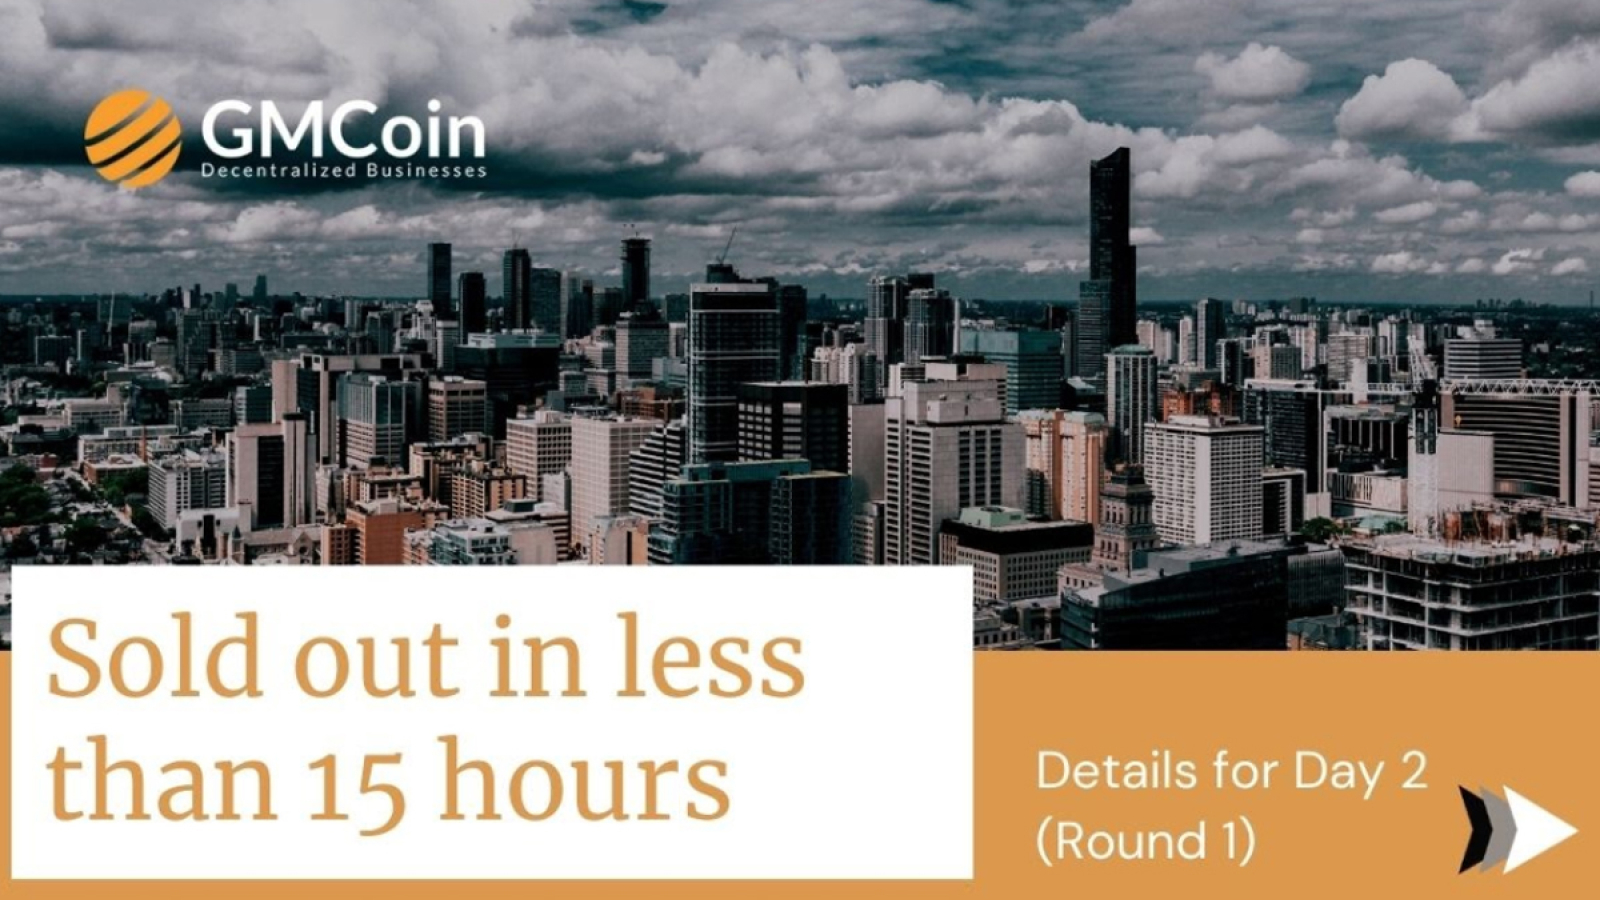 Gone In Less Than 15 Hours, $GMCoin With 100% Success On Day 1 Of 1st Round, Don't Miss Day 2